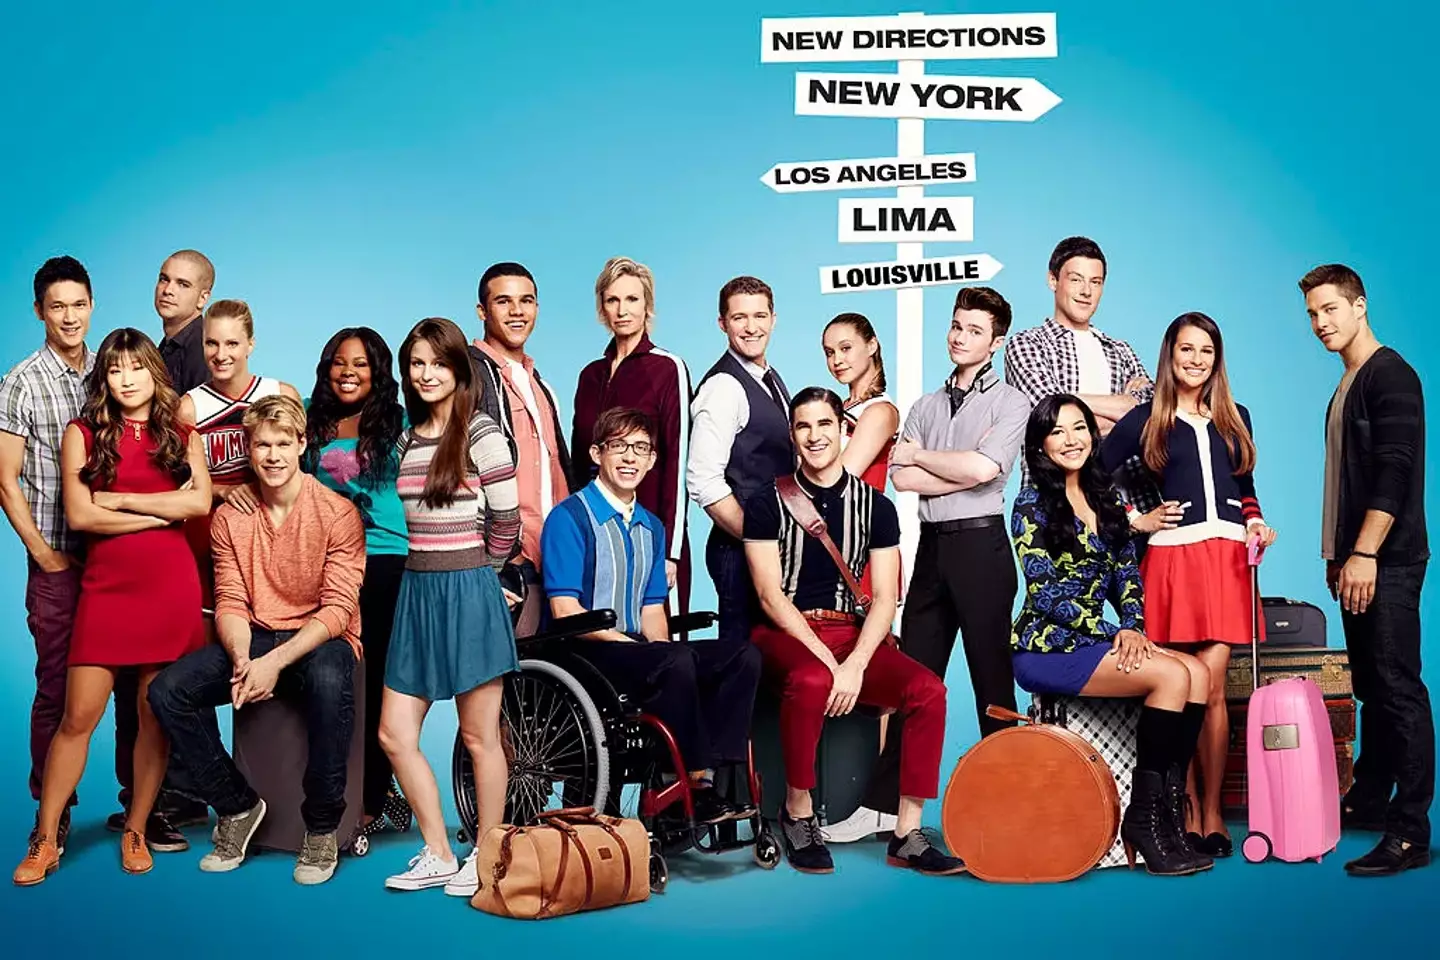 Ryan Murphy teased the possibility of Glee getting a reboot.